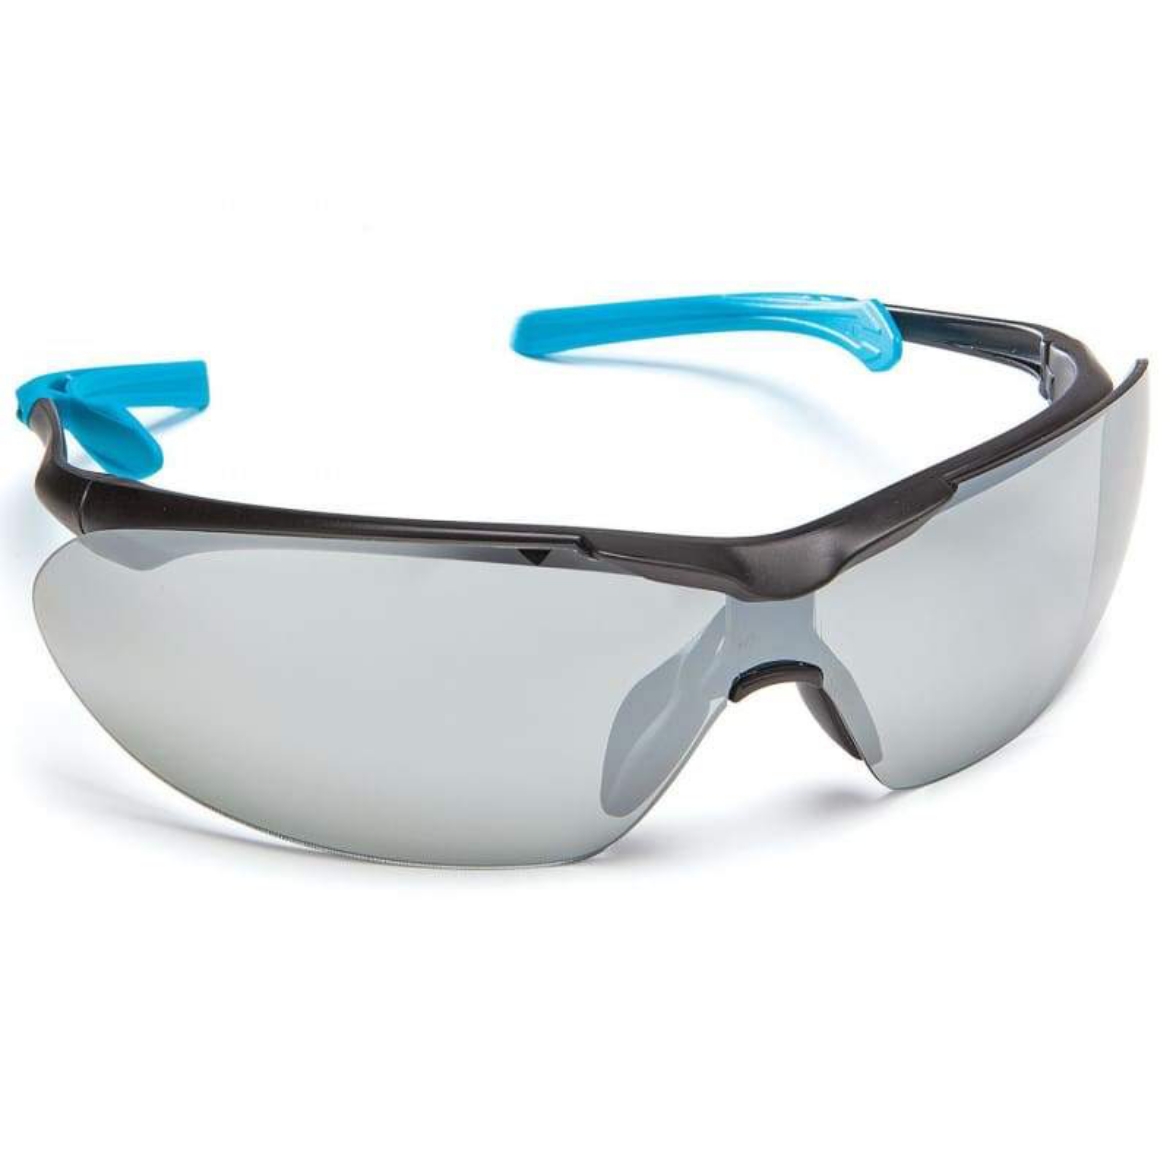 Picture of Force360 Eyefit Silver Mirror Lens Safety Glasses